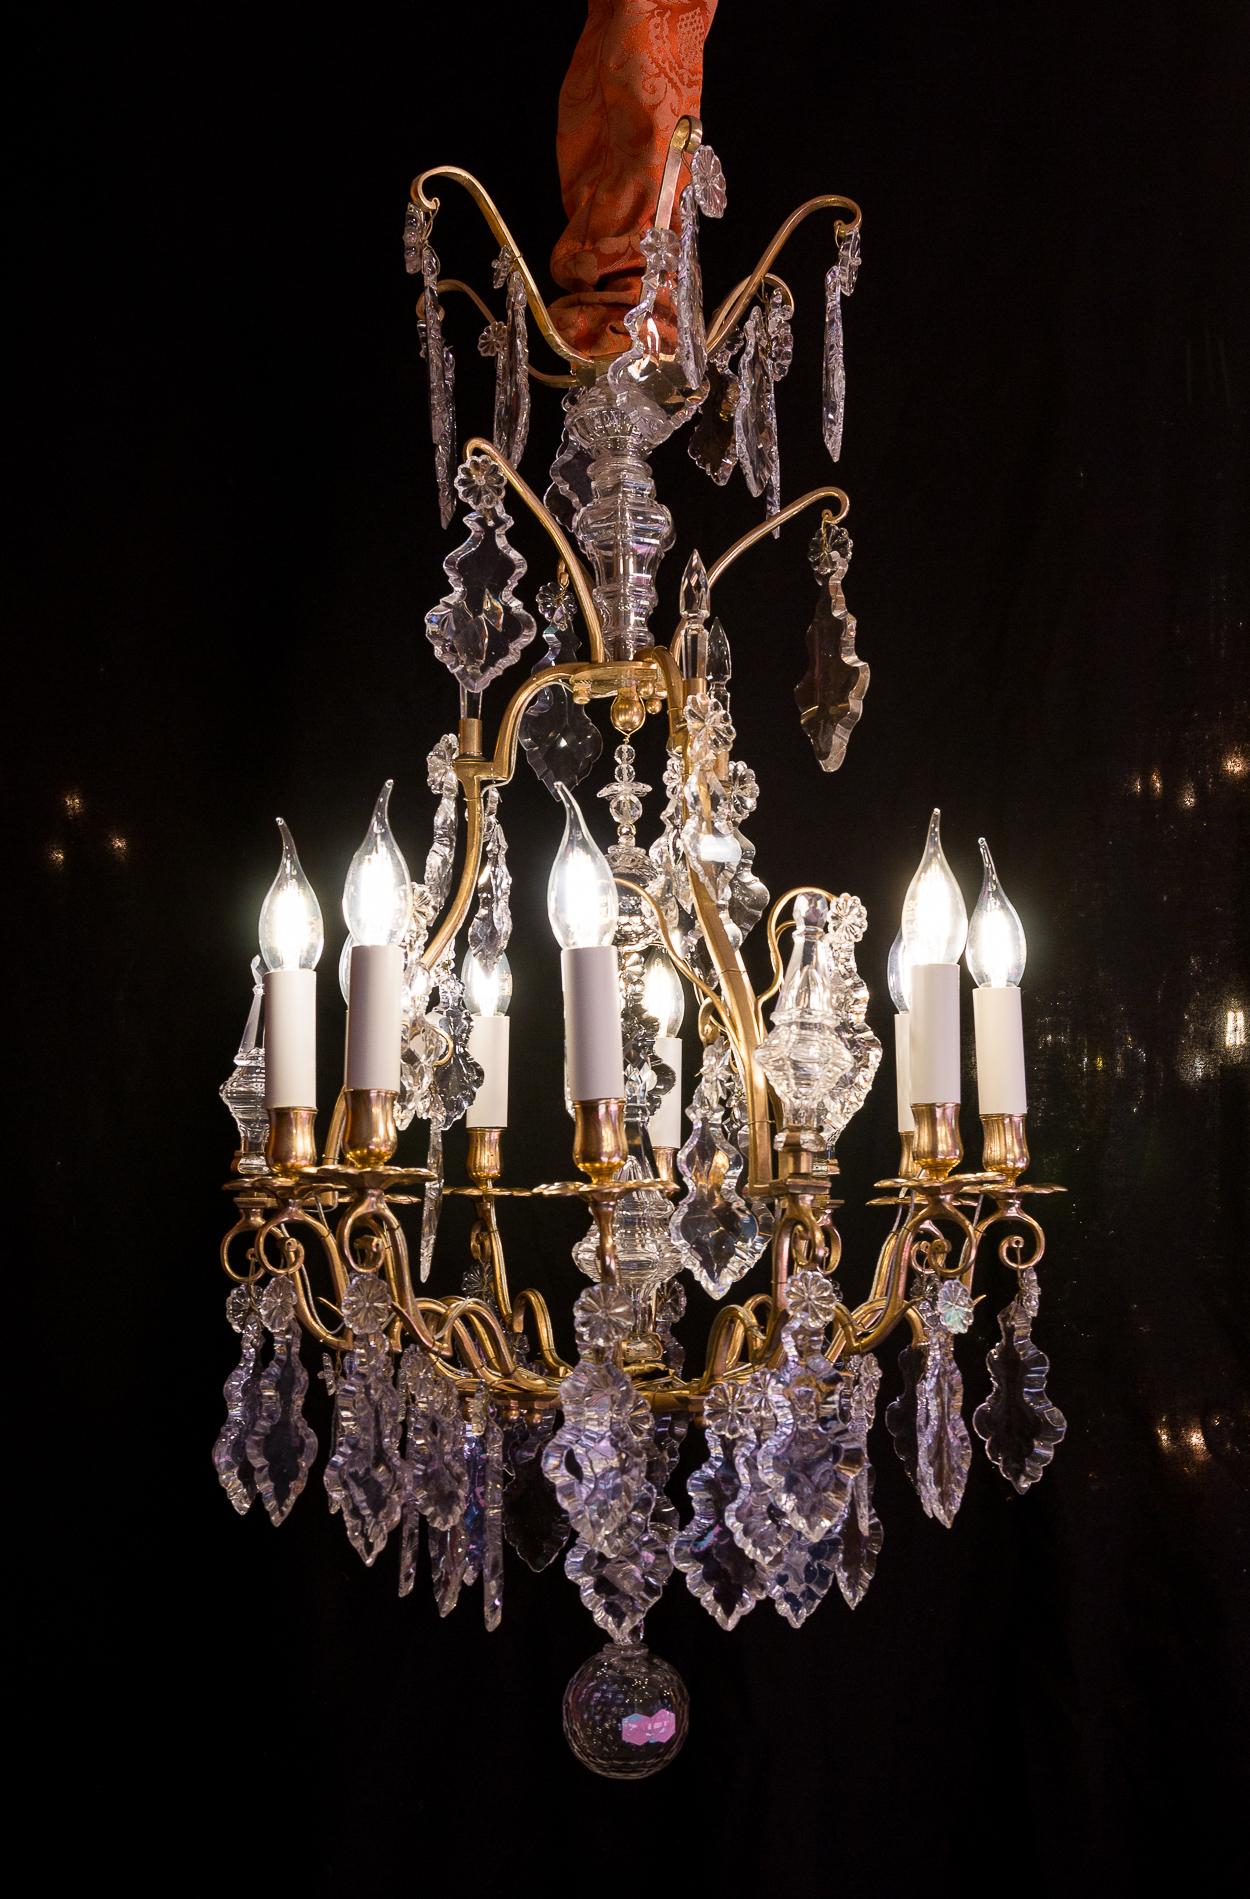 Cristalleries De Baccarat, French Louis XV style gilt bronze and cut crystal chandelier, circa 1880-1890.

An elegant and decorative gilt bronze and cut crystal chandelier in the Classic French Louis XV style, attributed to the Cristalleries De